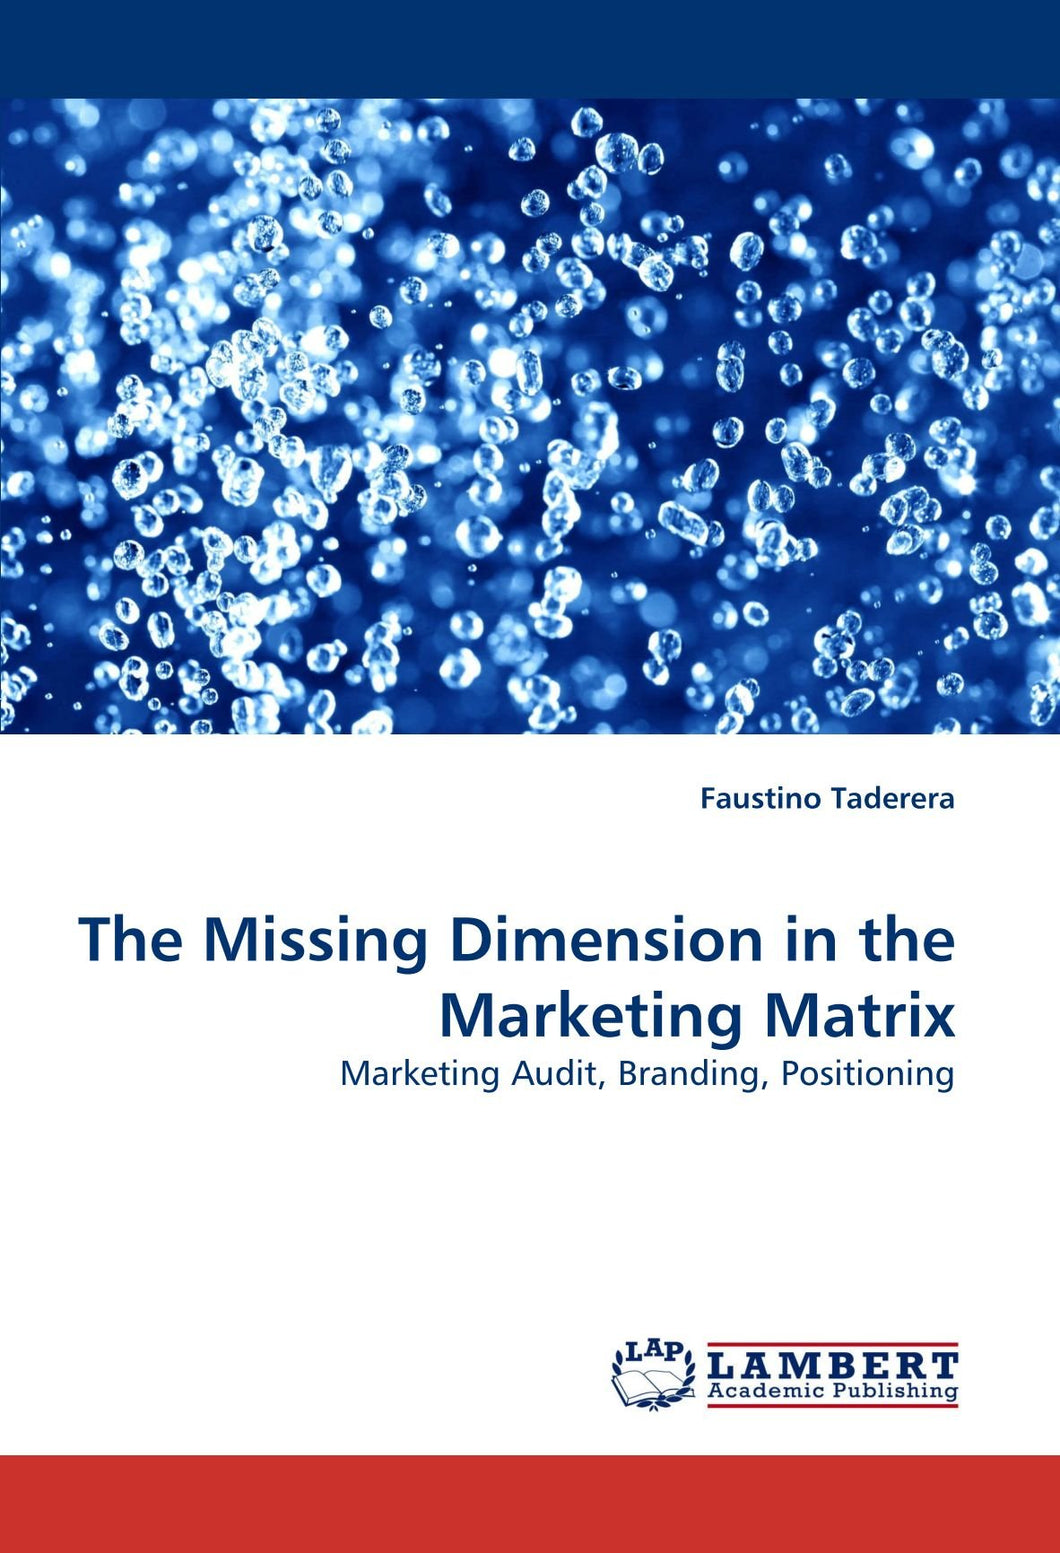 The Missing Dimension in the Marketing Matrix: Marketing Audit, Branding, Positioning